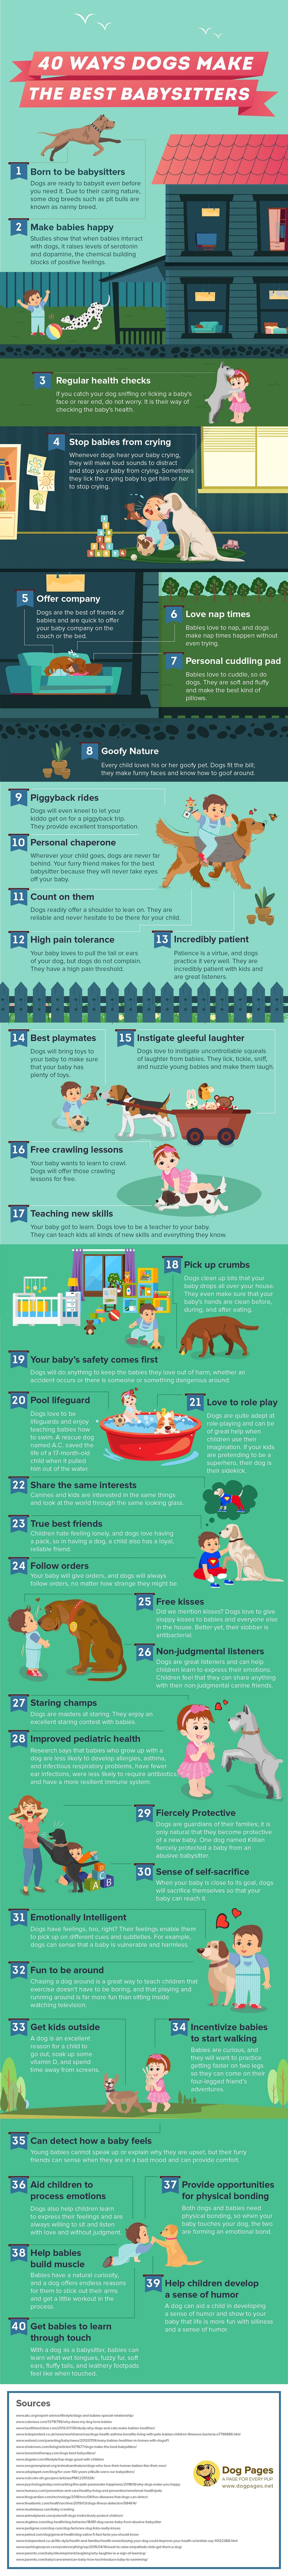 40 Ways Dogs Make the Best Babysitters #infographic